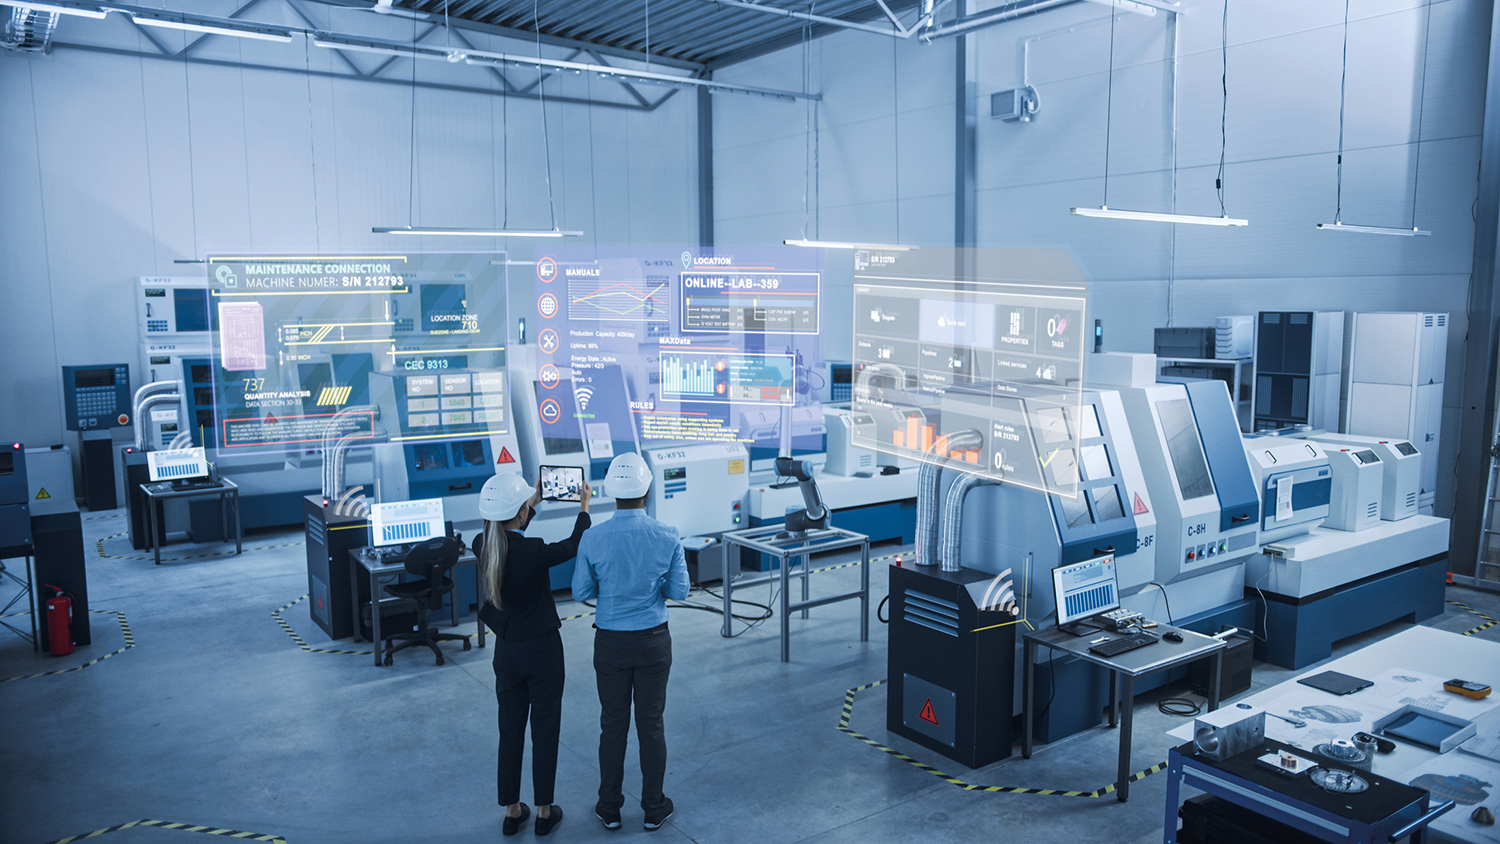 The factories of tomorrow will use data-driven insights to create predictive cyber-physical systems, leading to more flexibility, higher efficiency and increased productivity. [Source: Mitsubishi Electric Europe B.V.]